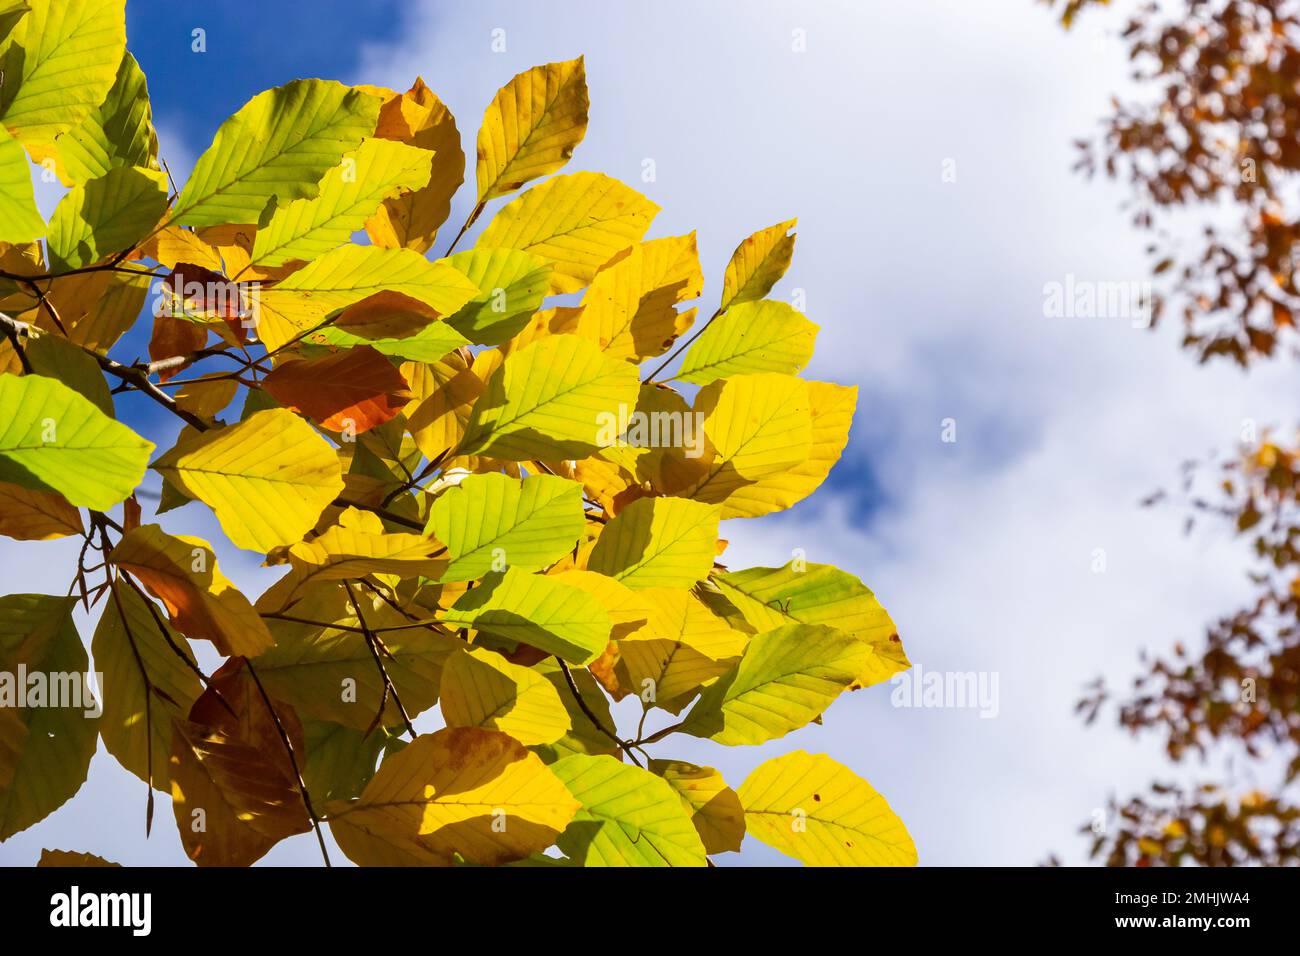 multicolored beech leaves on the branch in autumn against a blue sky in a sunny day. Stock Photo